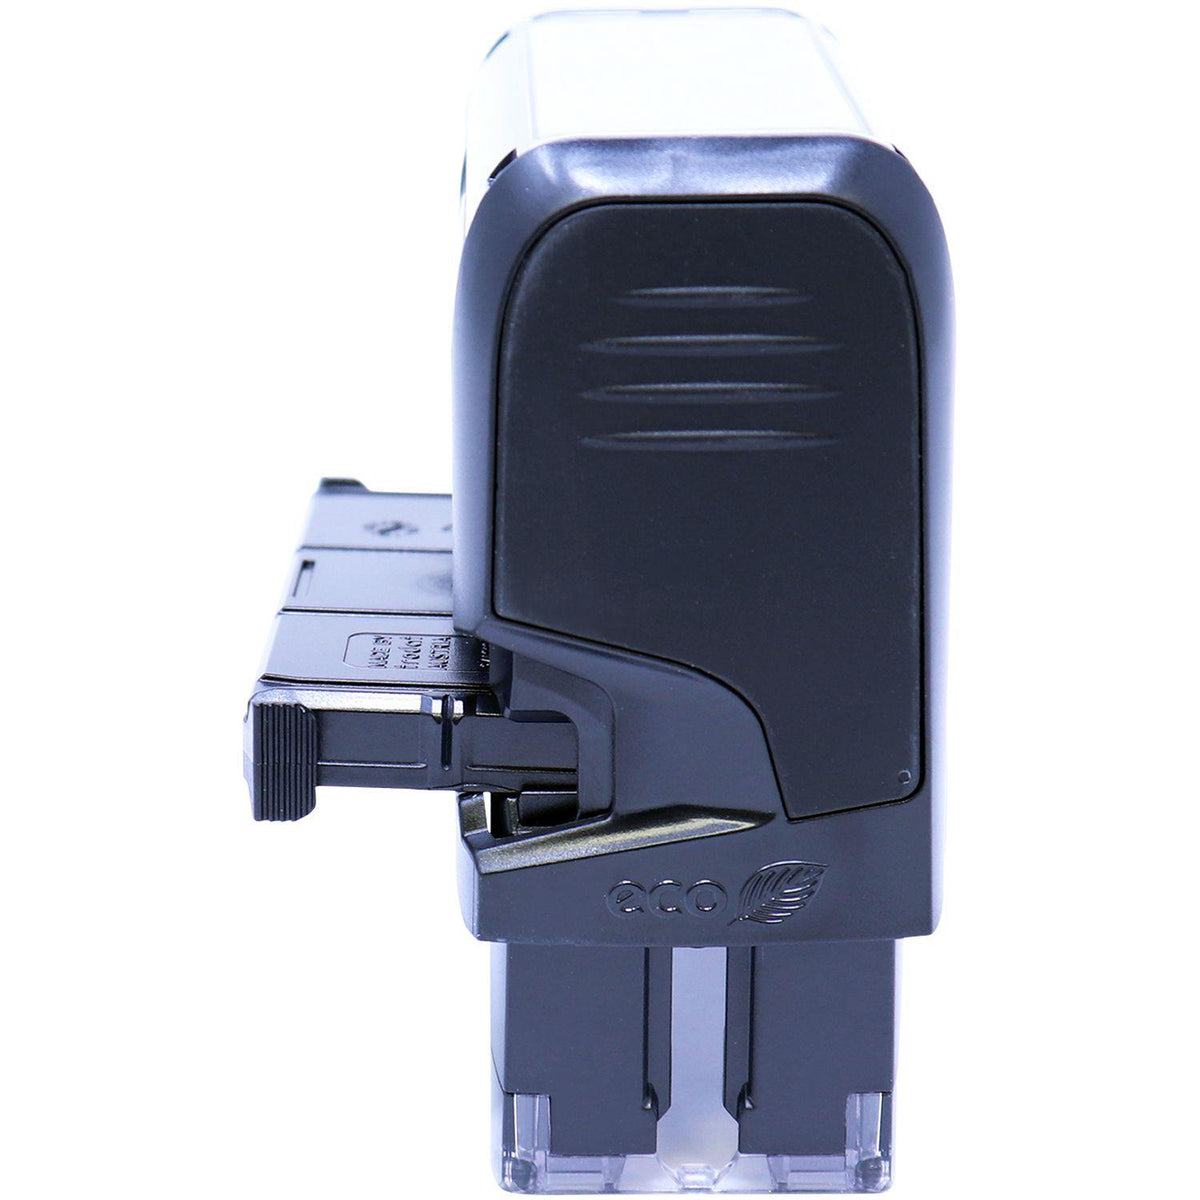 Self Inking E Mail Stamp - Engineer Seal Stamps - Brand_Trodat, Impression Size_Small, Stamp Type_Self-Inking Stamp, Type of Use_Office